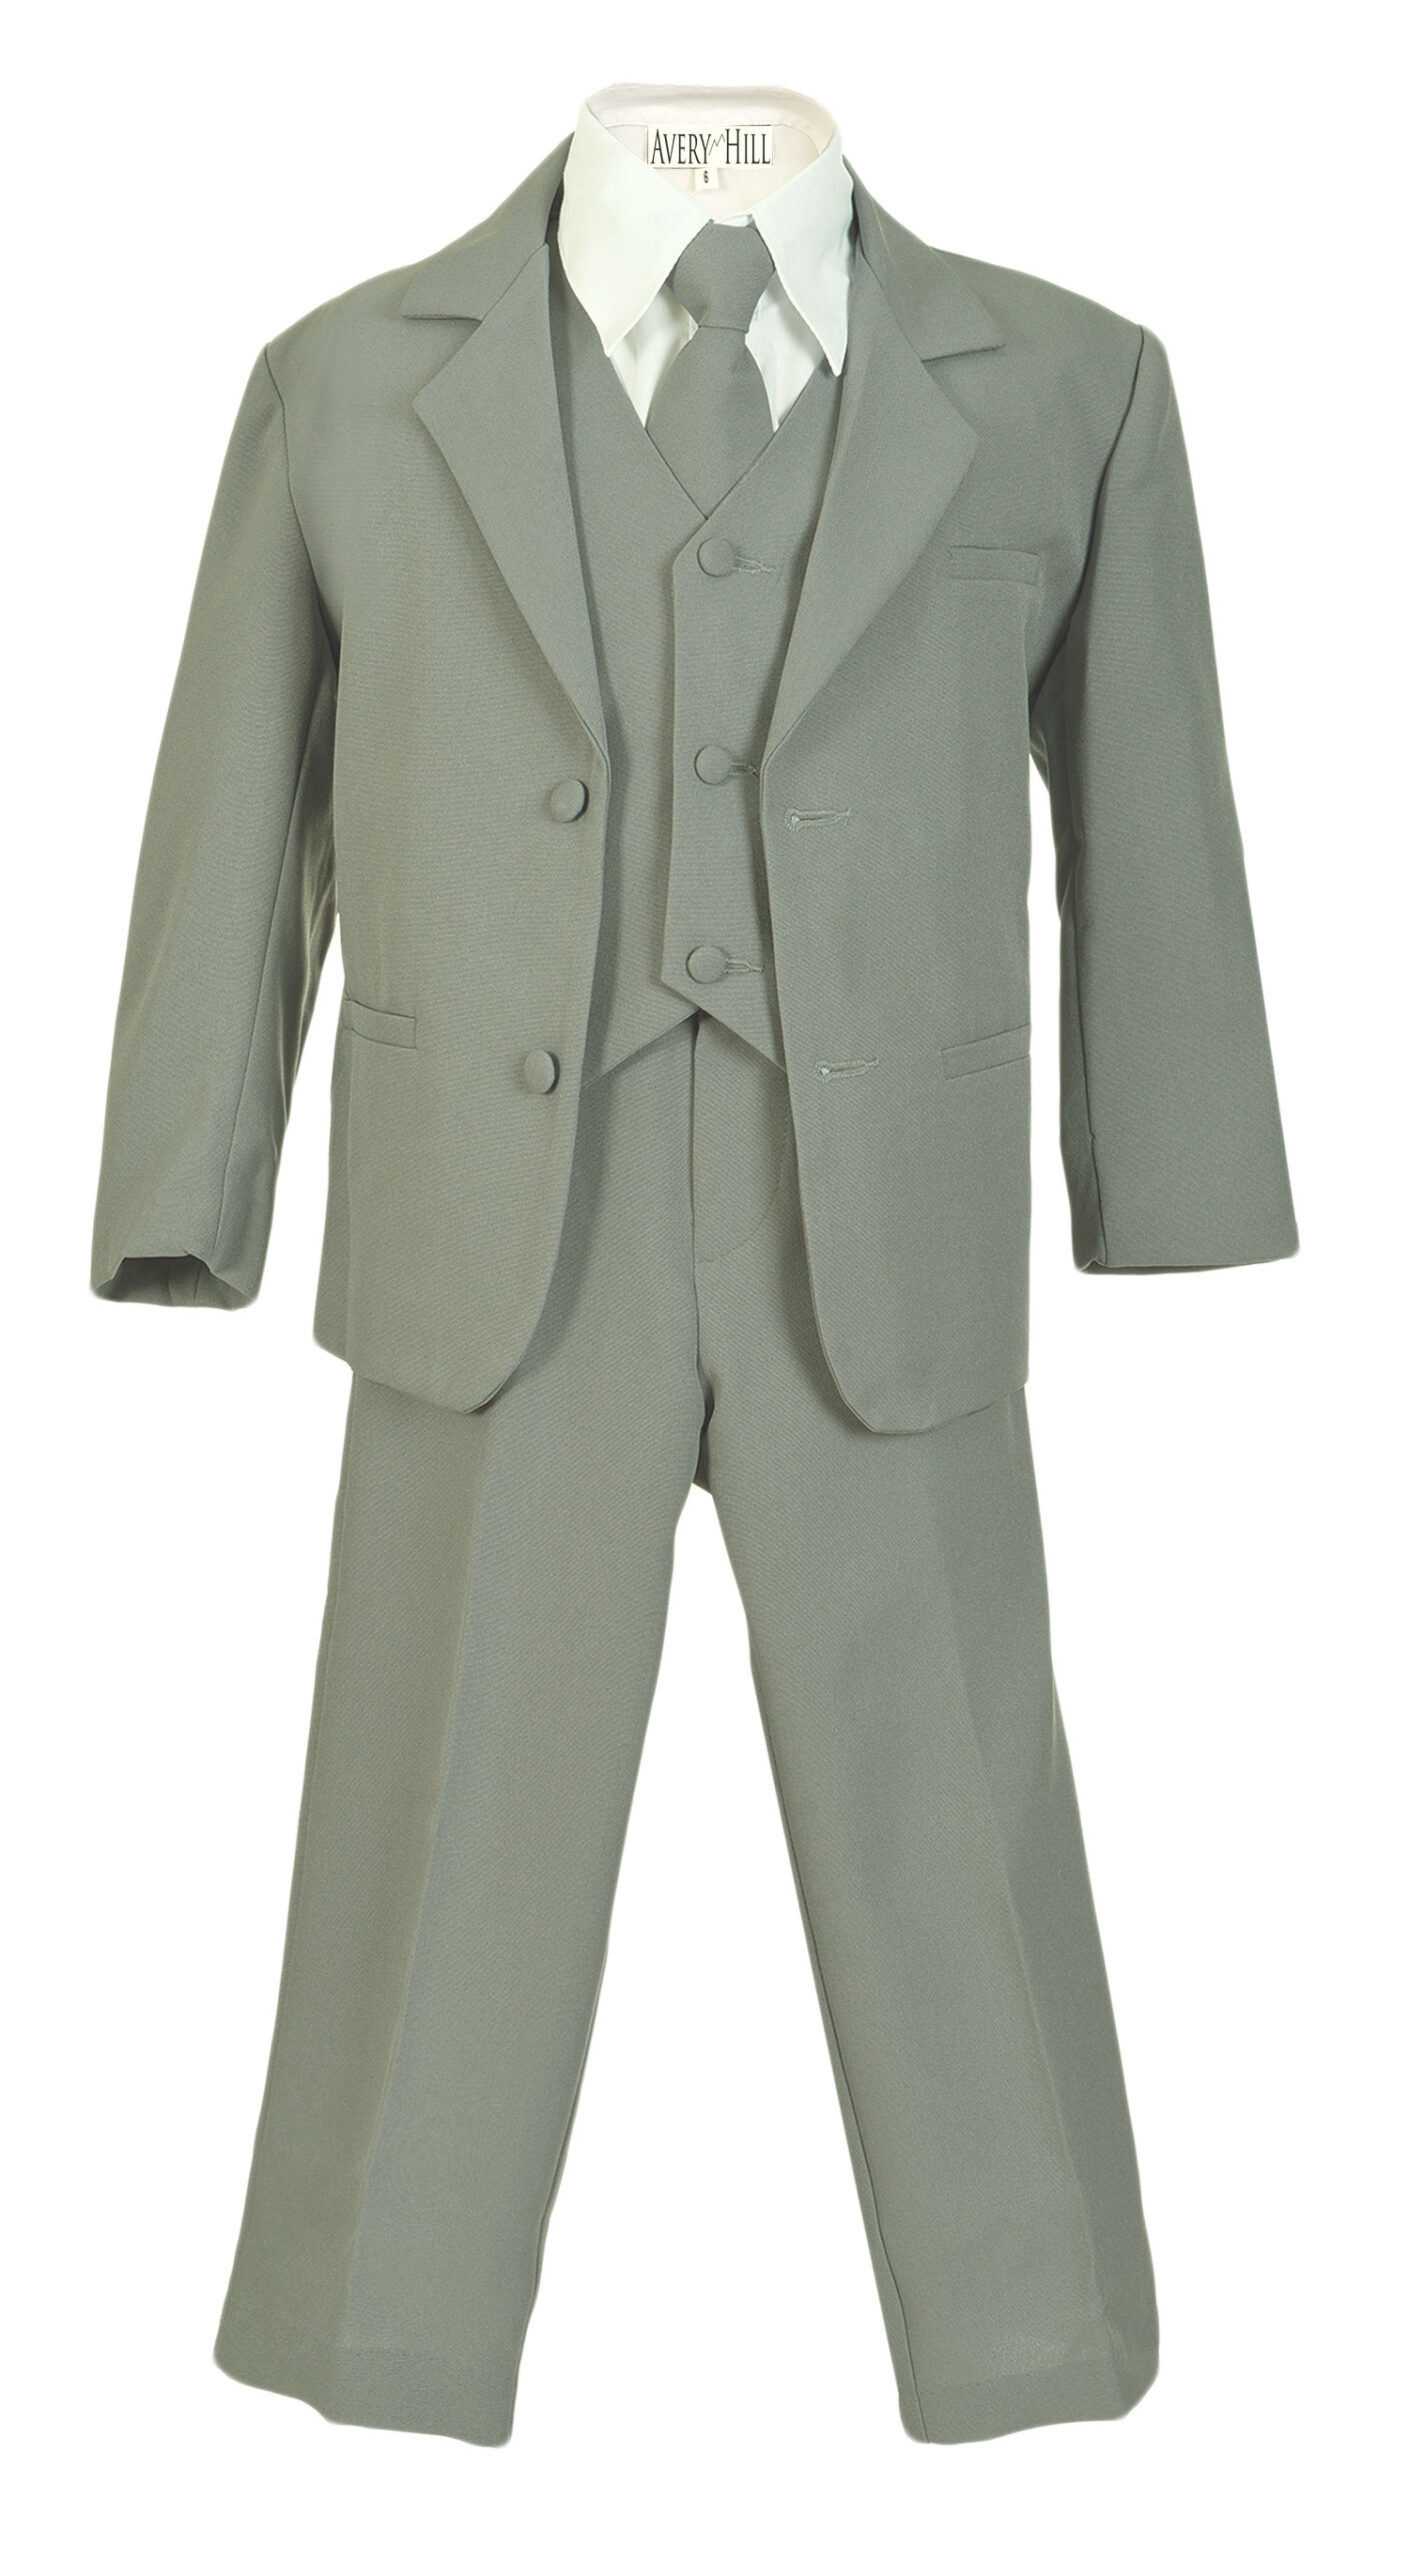 Avery Hill Boys Formal 5 Piece Suit with Shirt and Vest Silver White - 4T